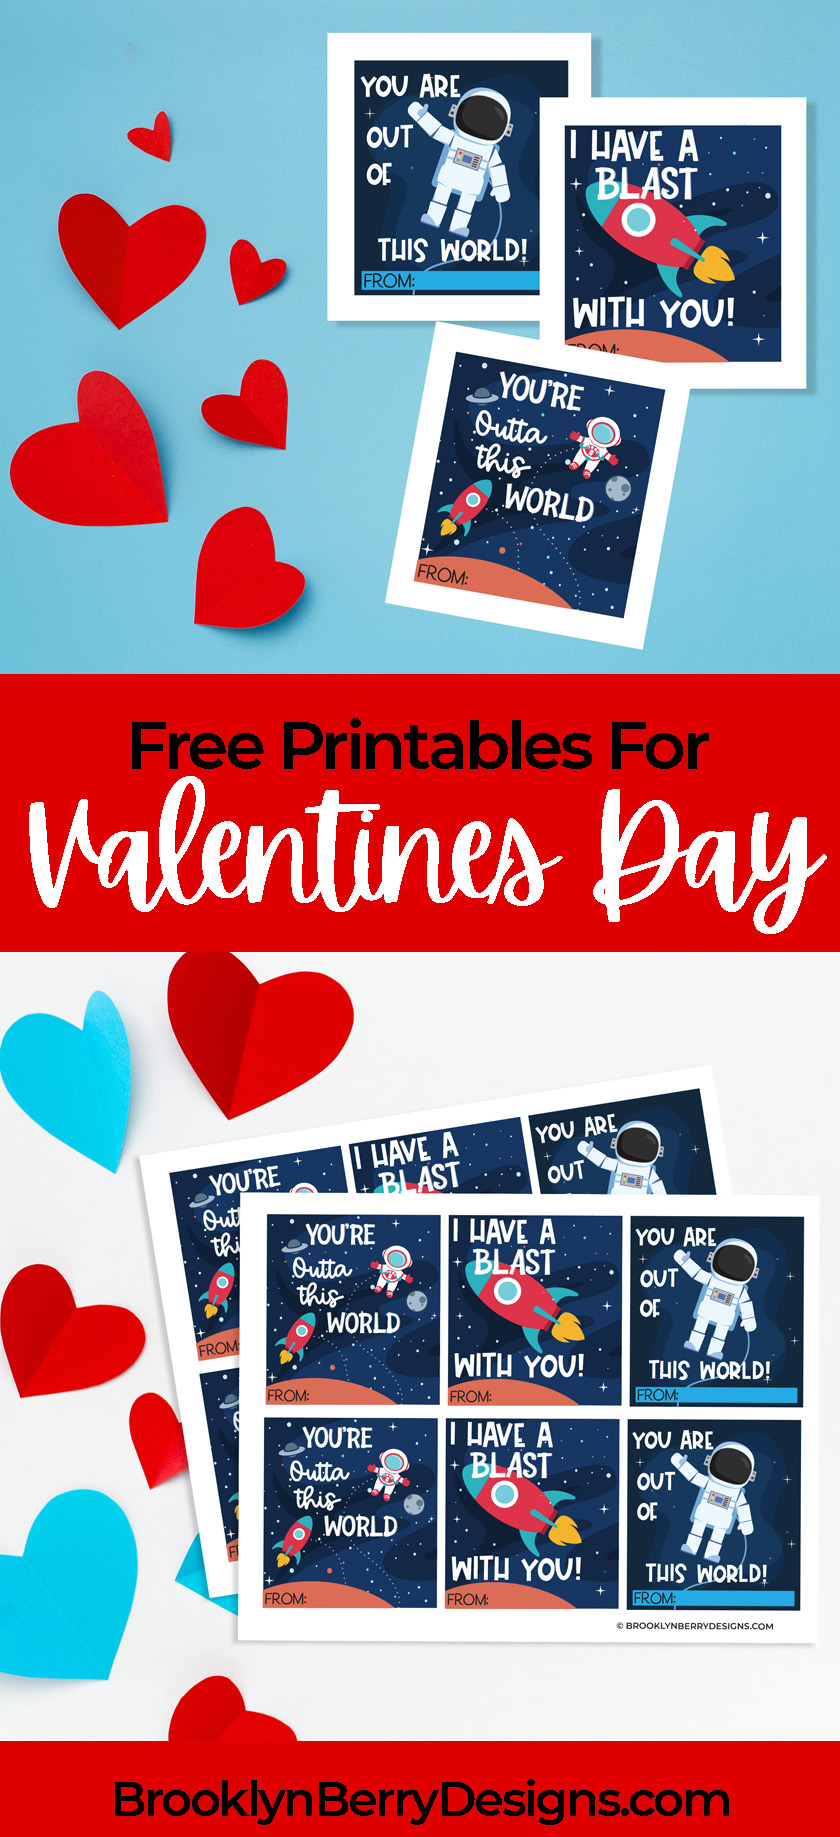 cut out paper hearts and paper with space themed valentines cards.